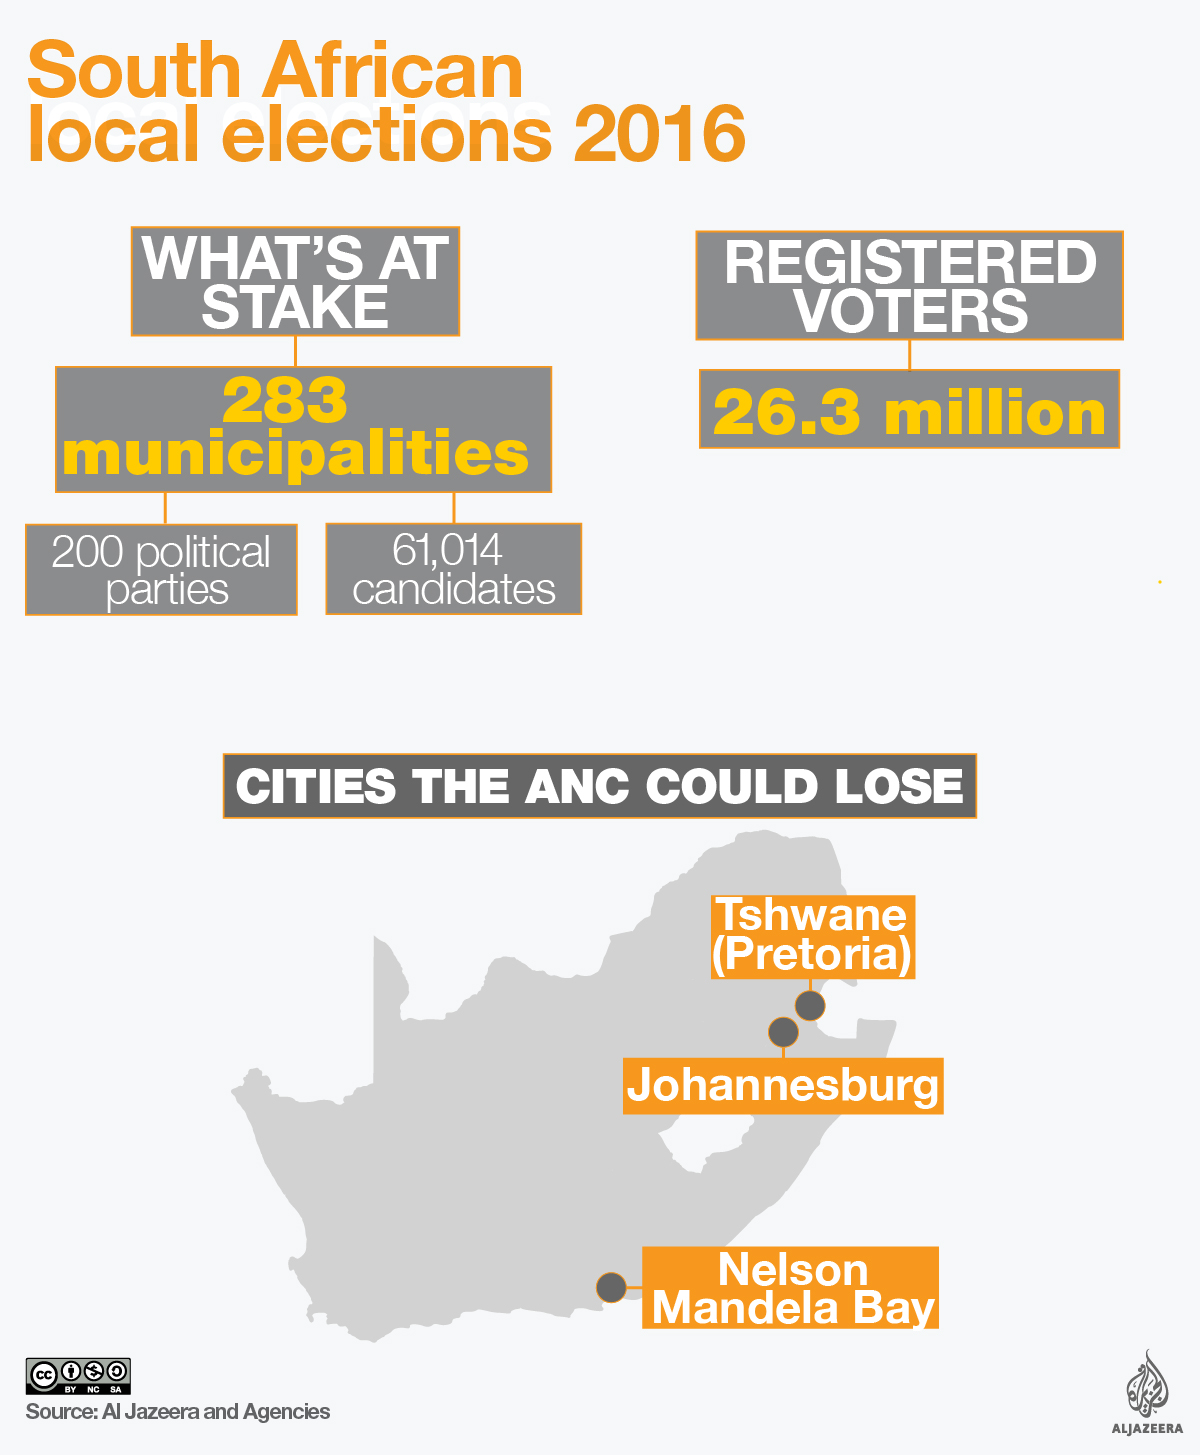 South Africa local elections 2016